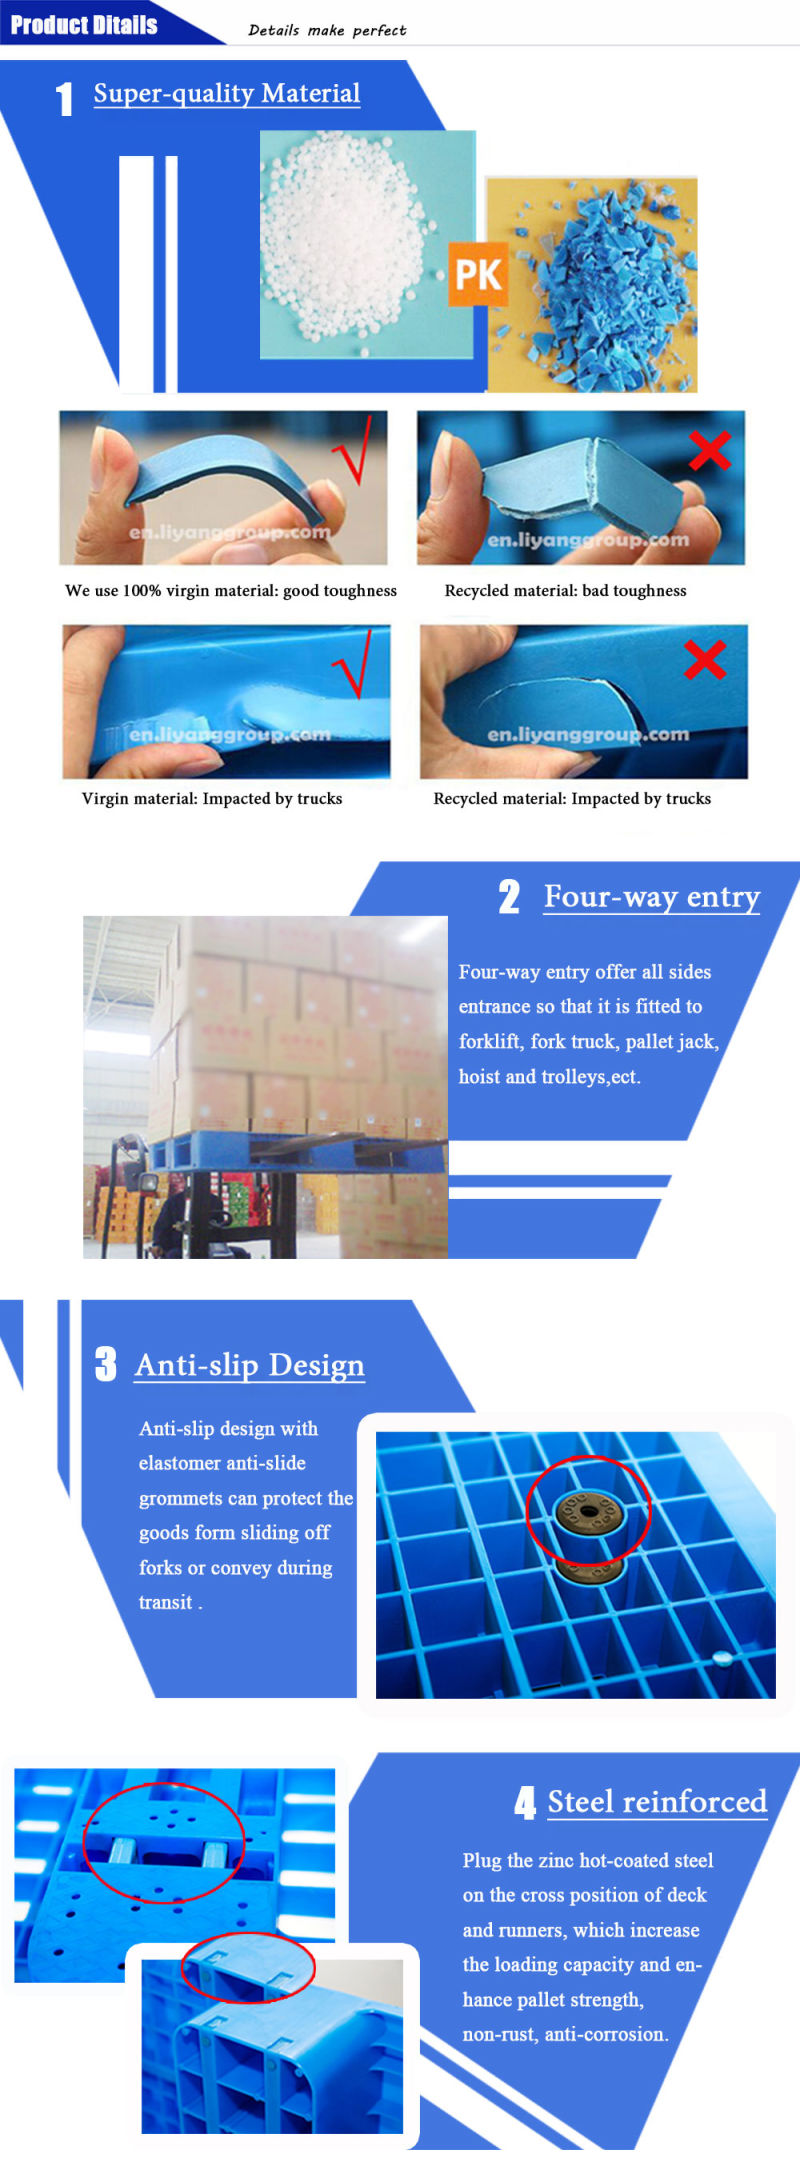 Safe Storage HDPE Plastic Tray Pallet for Warehouse